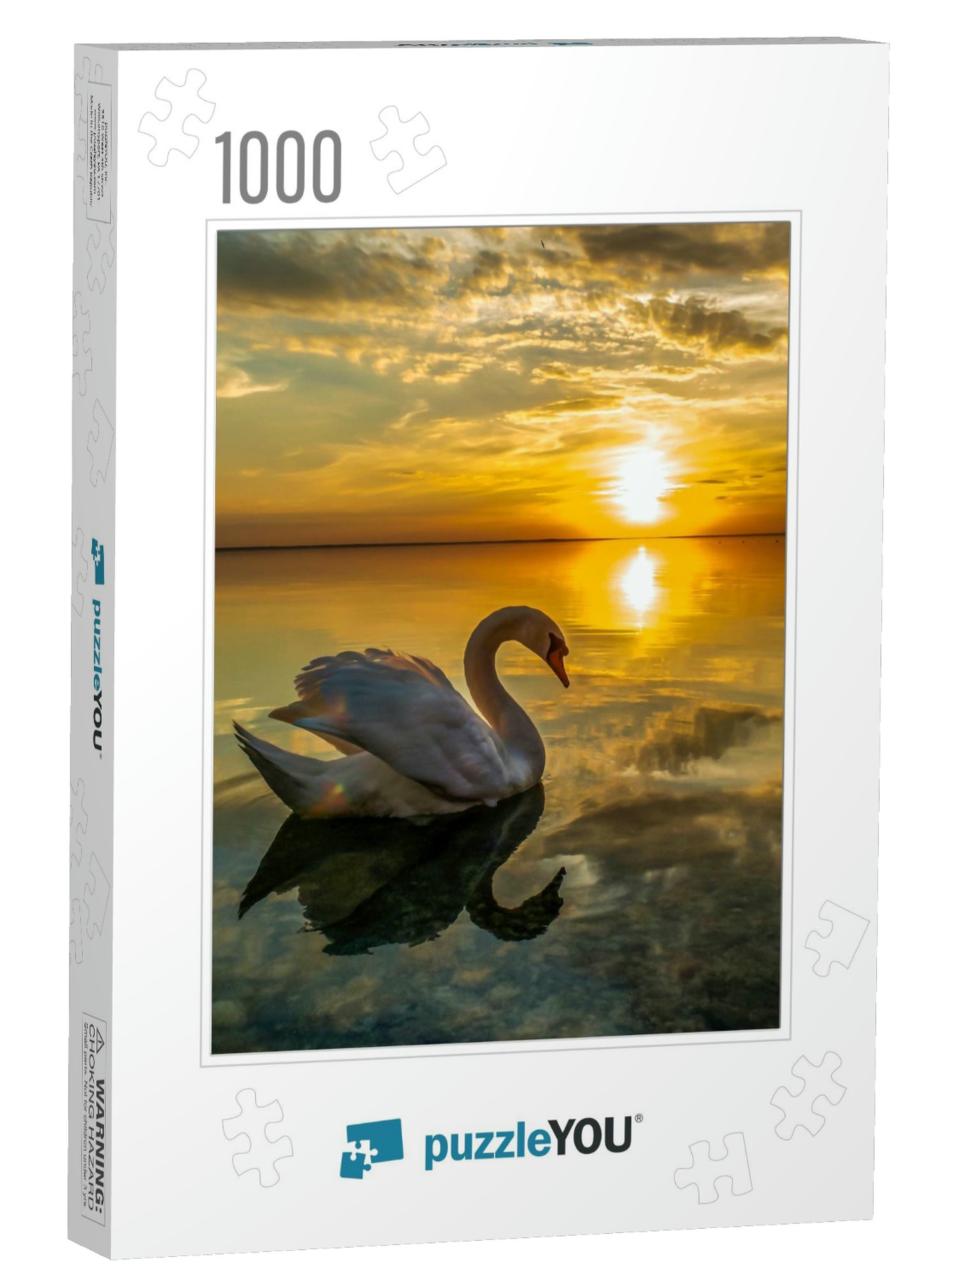 White Swan Swimming in Sunset Water... Jigsaw Puzzle with 1000 pieces